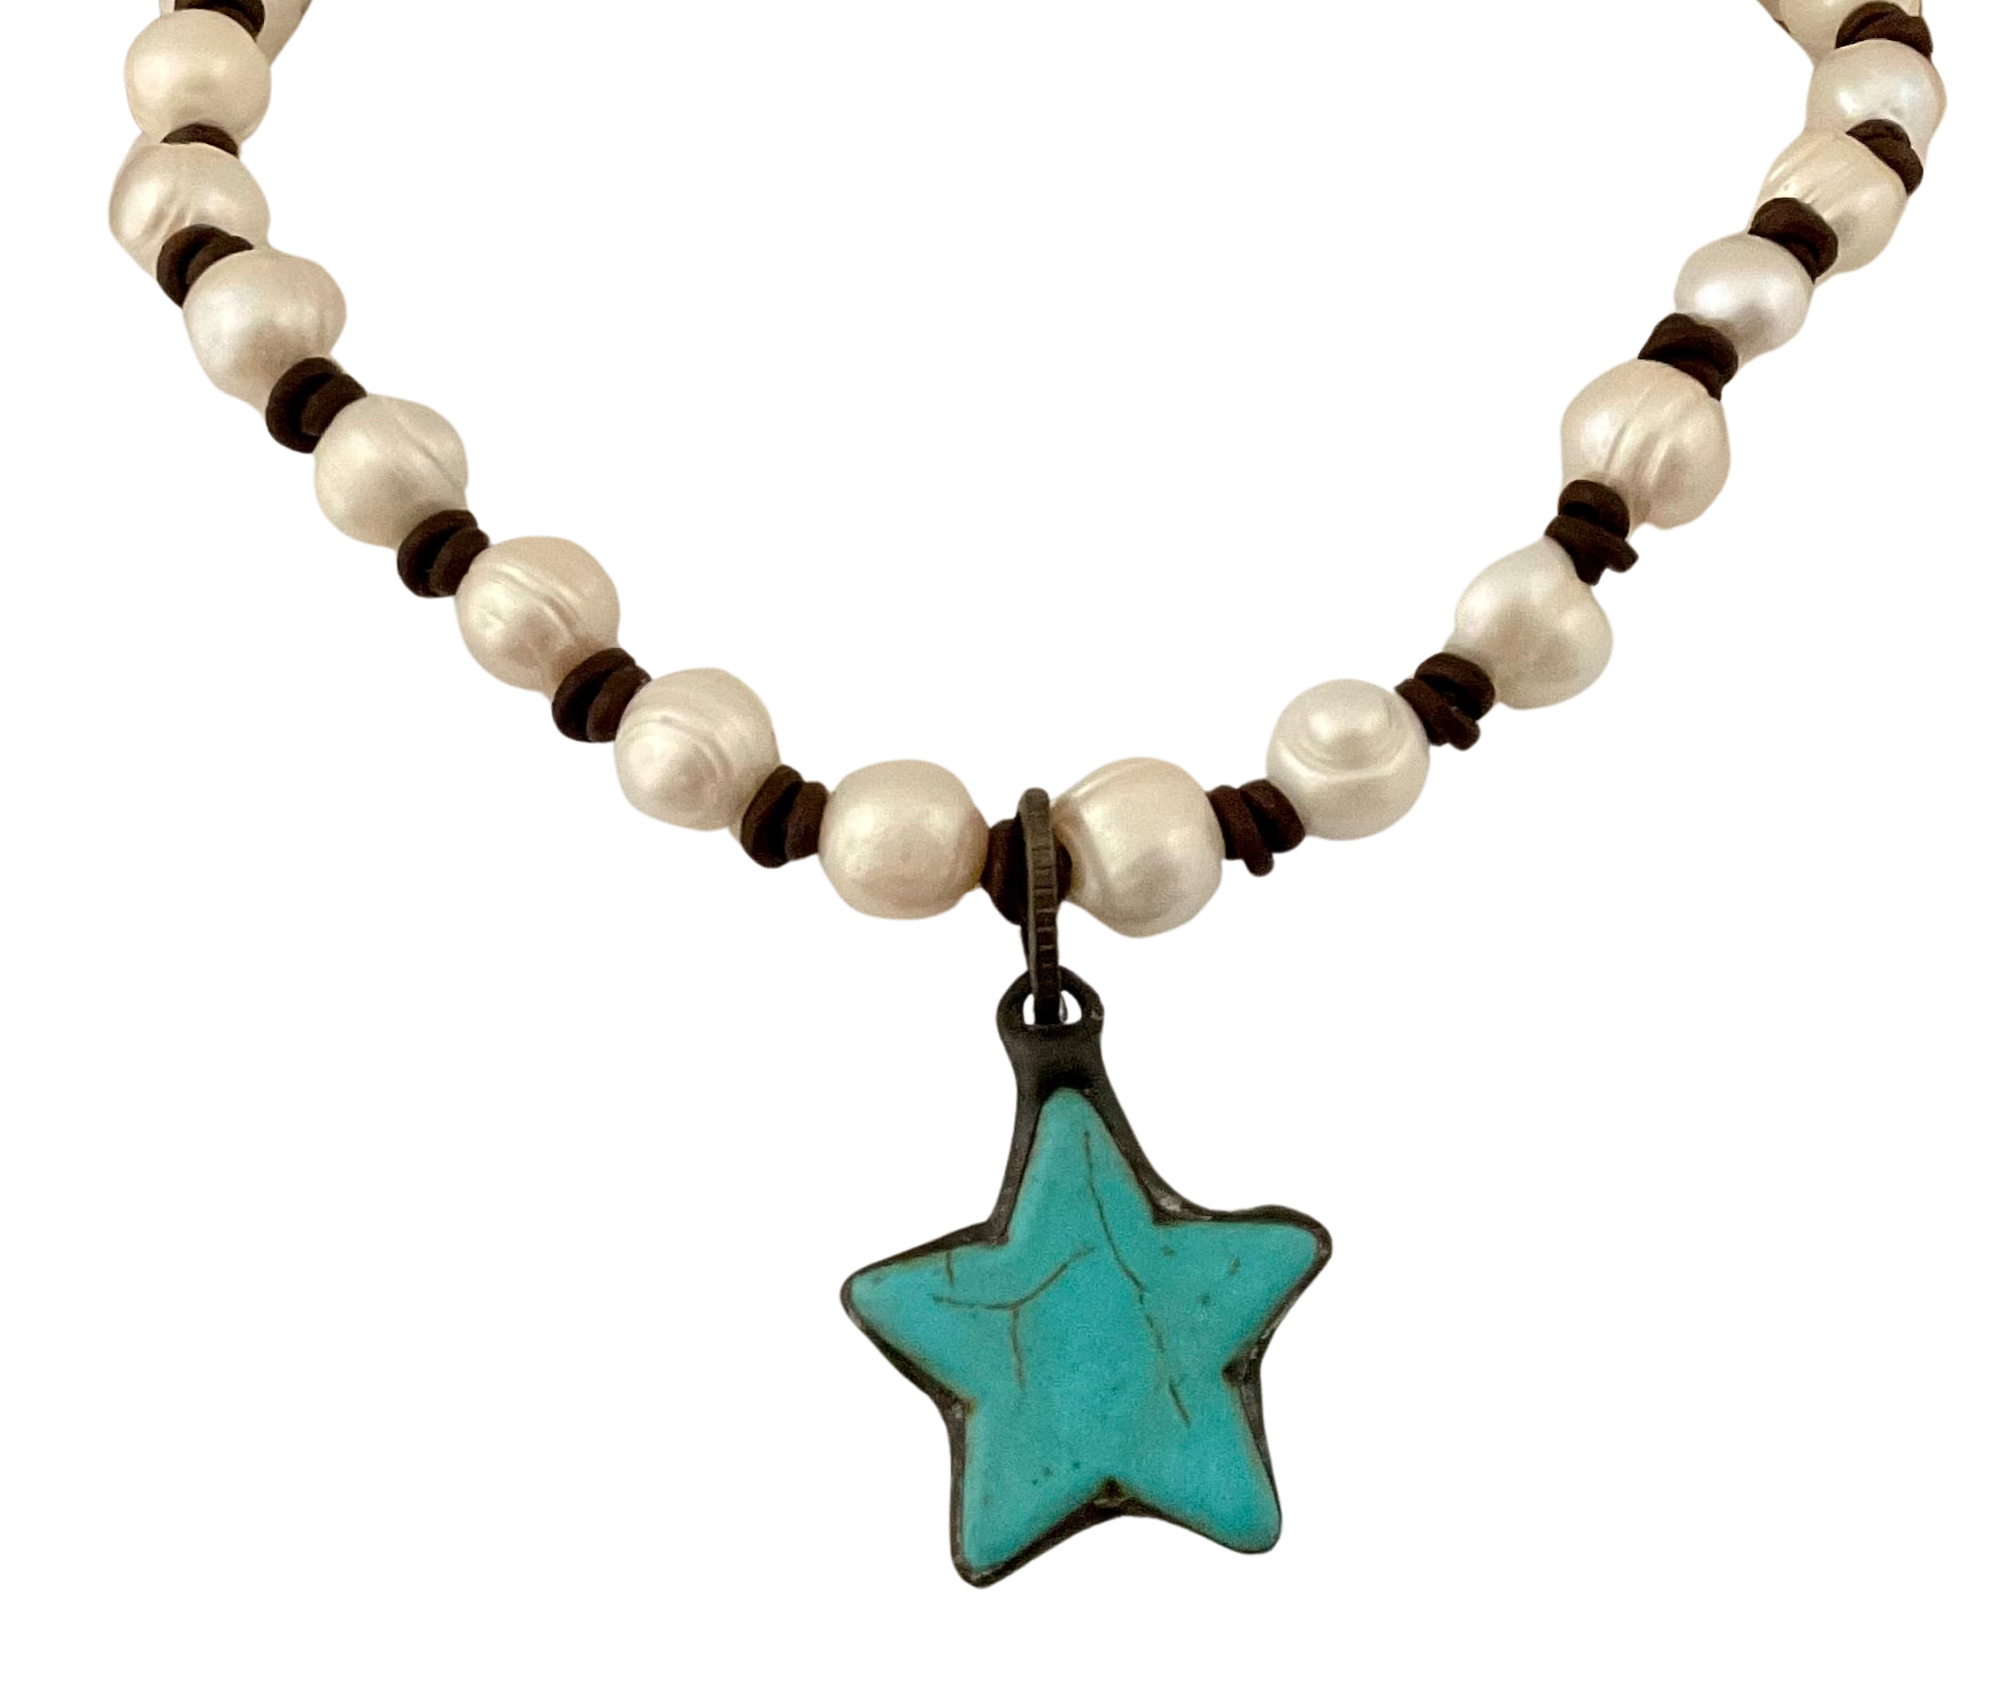 White Freshwater Pearl & Leather Necklace with Turquoise Star Pendant